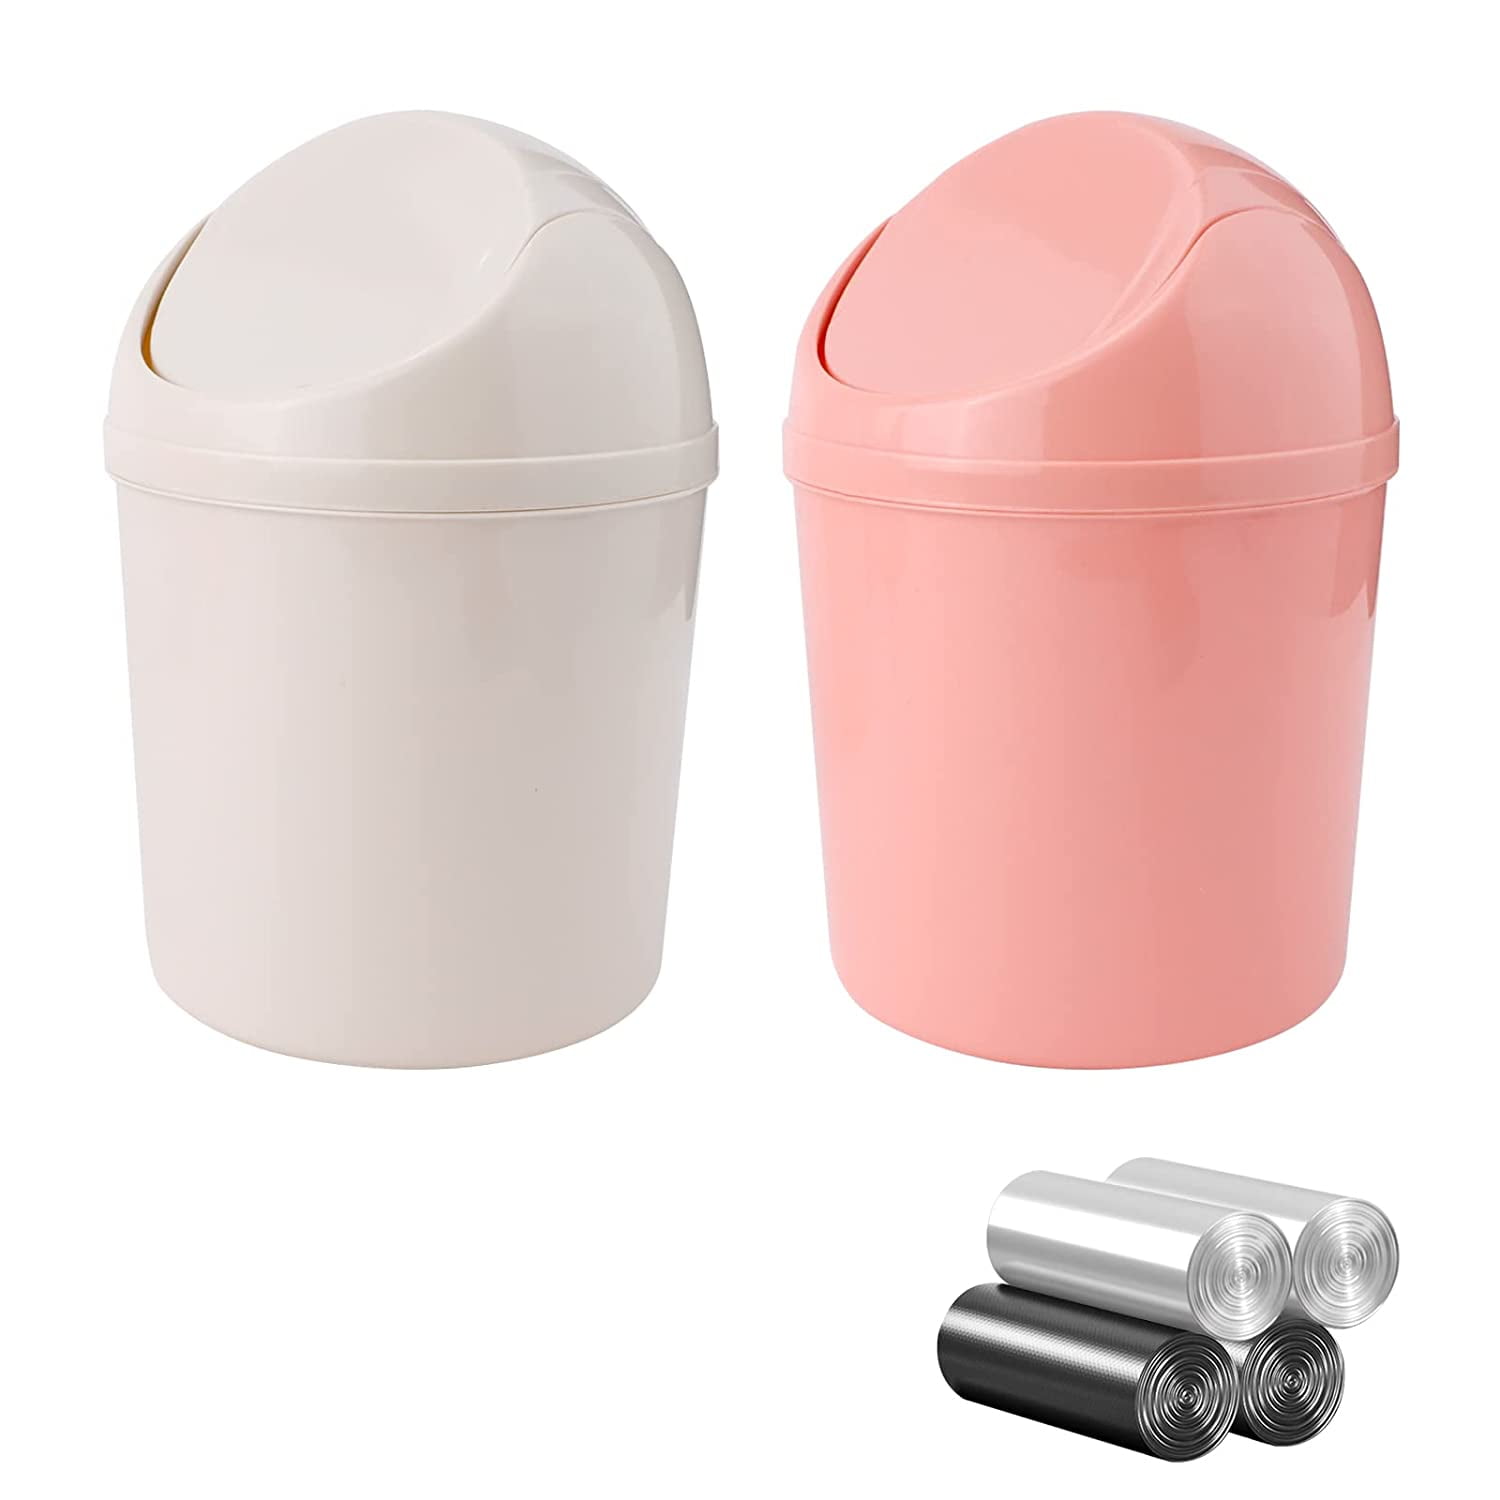 STONCEL 2 Pcs Plastic Mini Wastebasket Trash Can with Swing Lid with 120  Trash Bags, Tiny Desktop Waste Garbage Bin for Home, Office, Kitchen,  Vanity